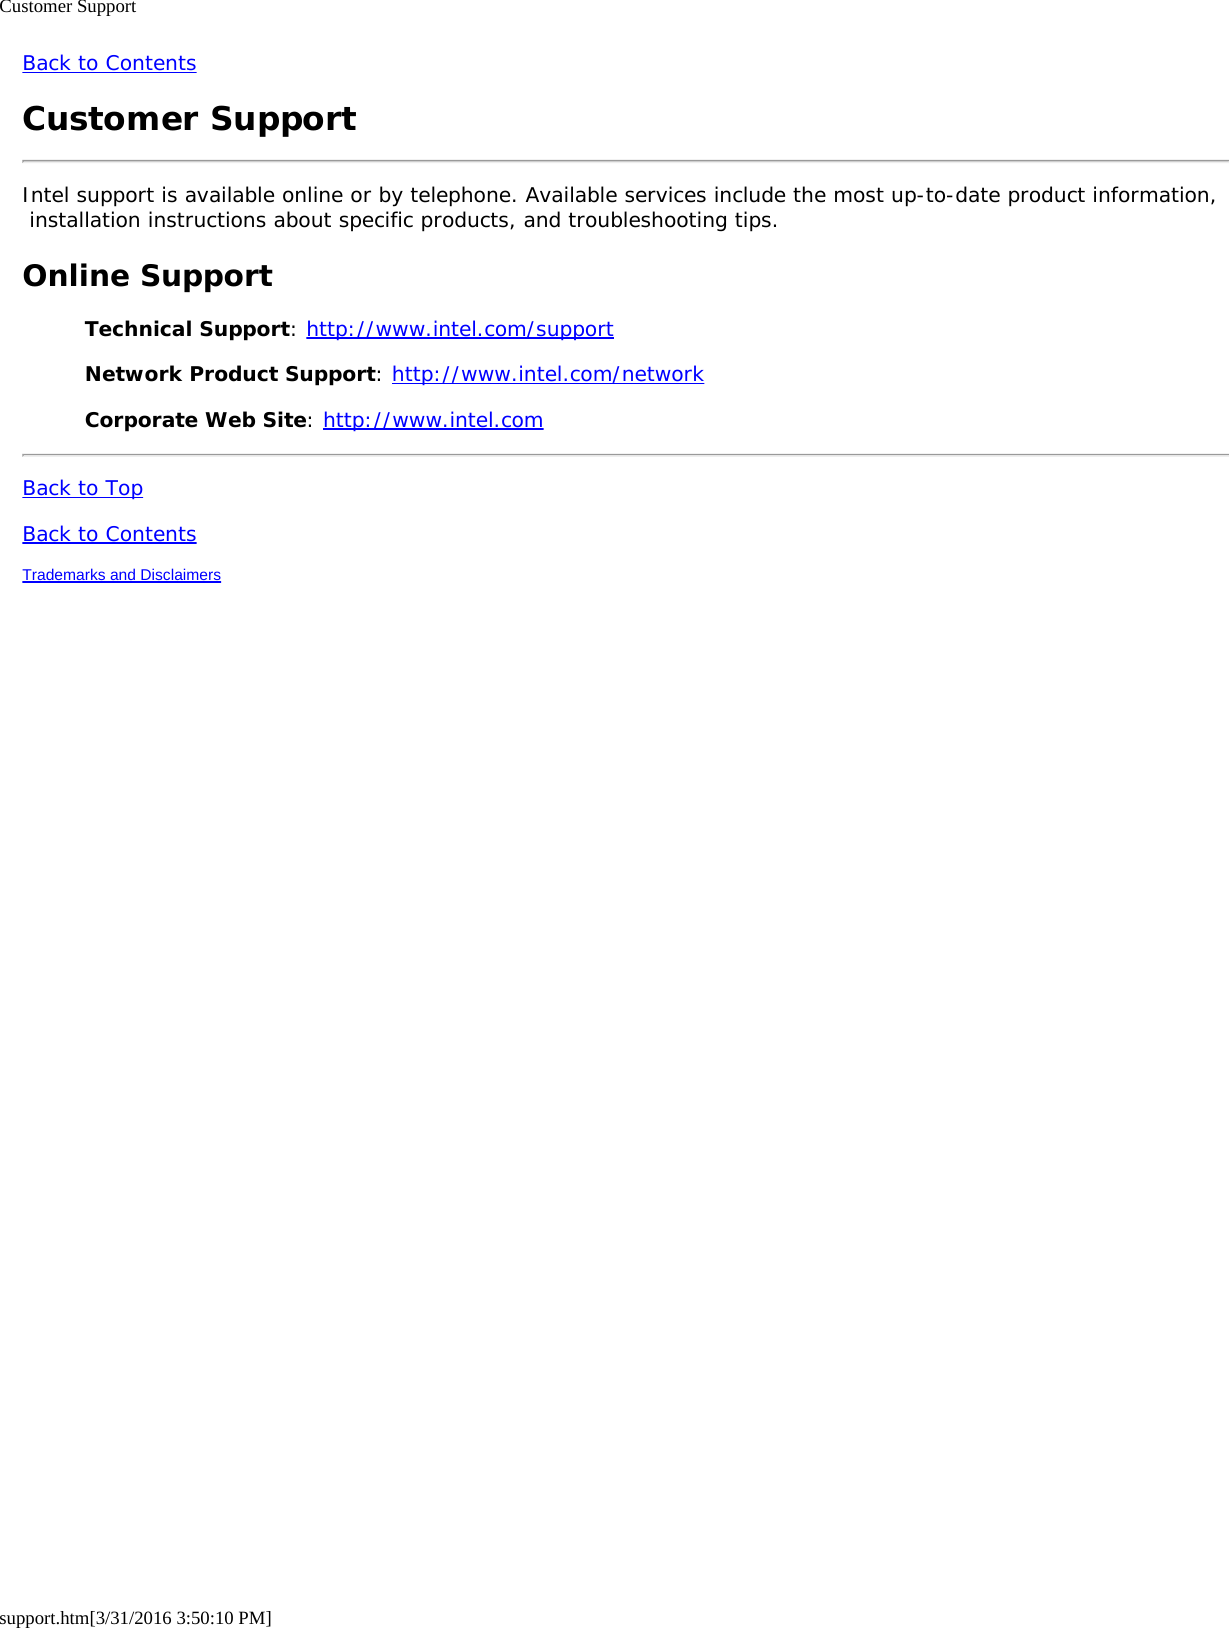 Customer Supportsupport.htm[3/31/2016 3:50:10 PM]Back to ContentsCustomer SupportIntel support is available online or by telephone. Available services include the most up-to-date product information, installation instructions about specific products, and troubleshooting tips.Online SupportTechnical Support: http://www.intel.com/supportNetwork Product Support: http://www.intel.com/networkCorporate Web Site: http://www.intel.comBack to TopBack to ContentsTrademarks and Disclaimers